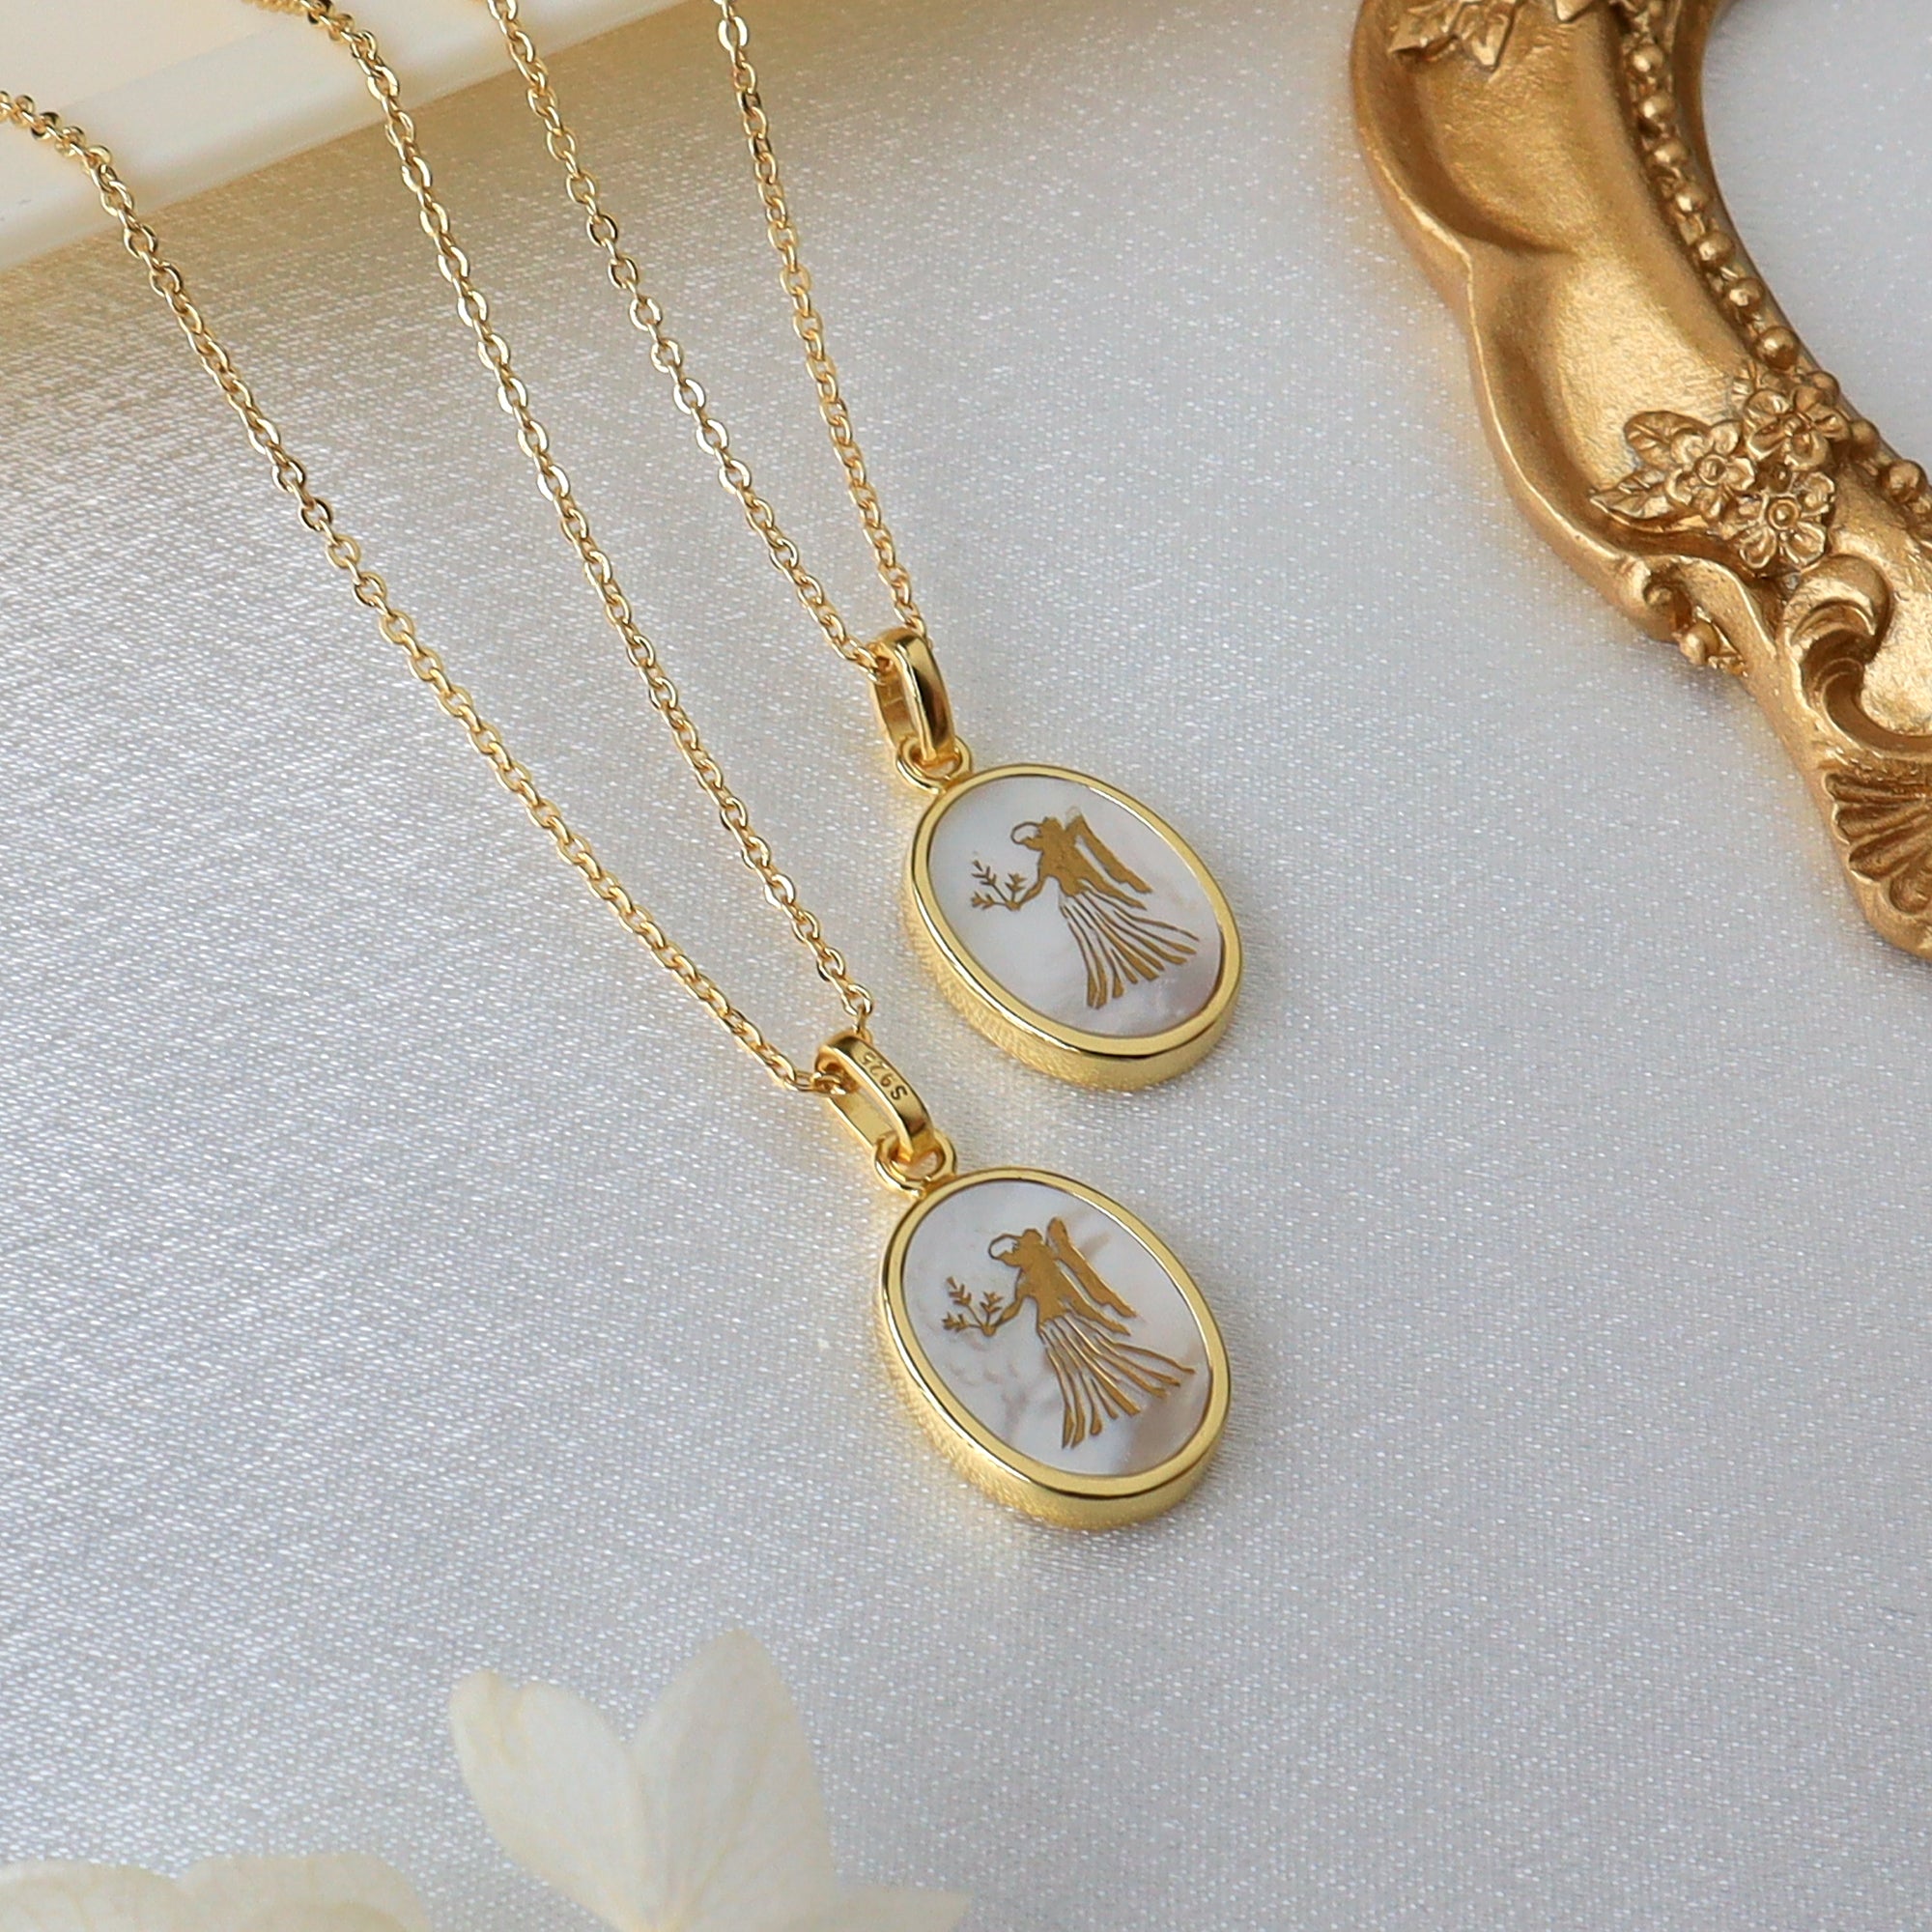 Wholesale Gold Plated Oval White Shell Carved Goddess Pendant Necklace, Natural Shell Jewelry KZ007